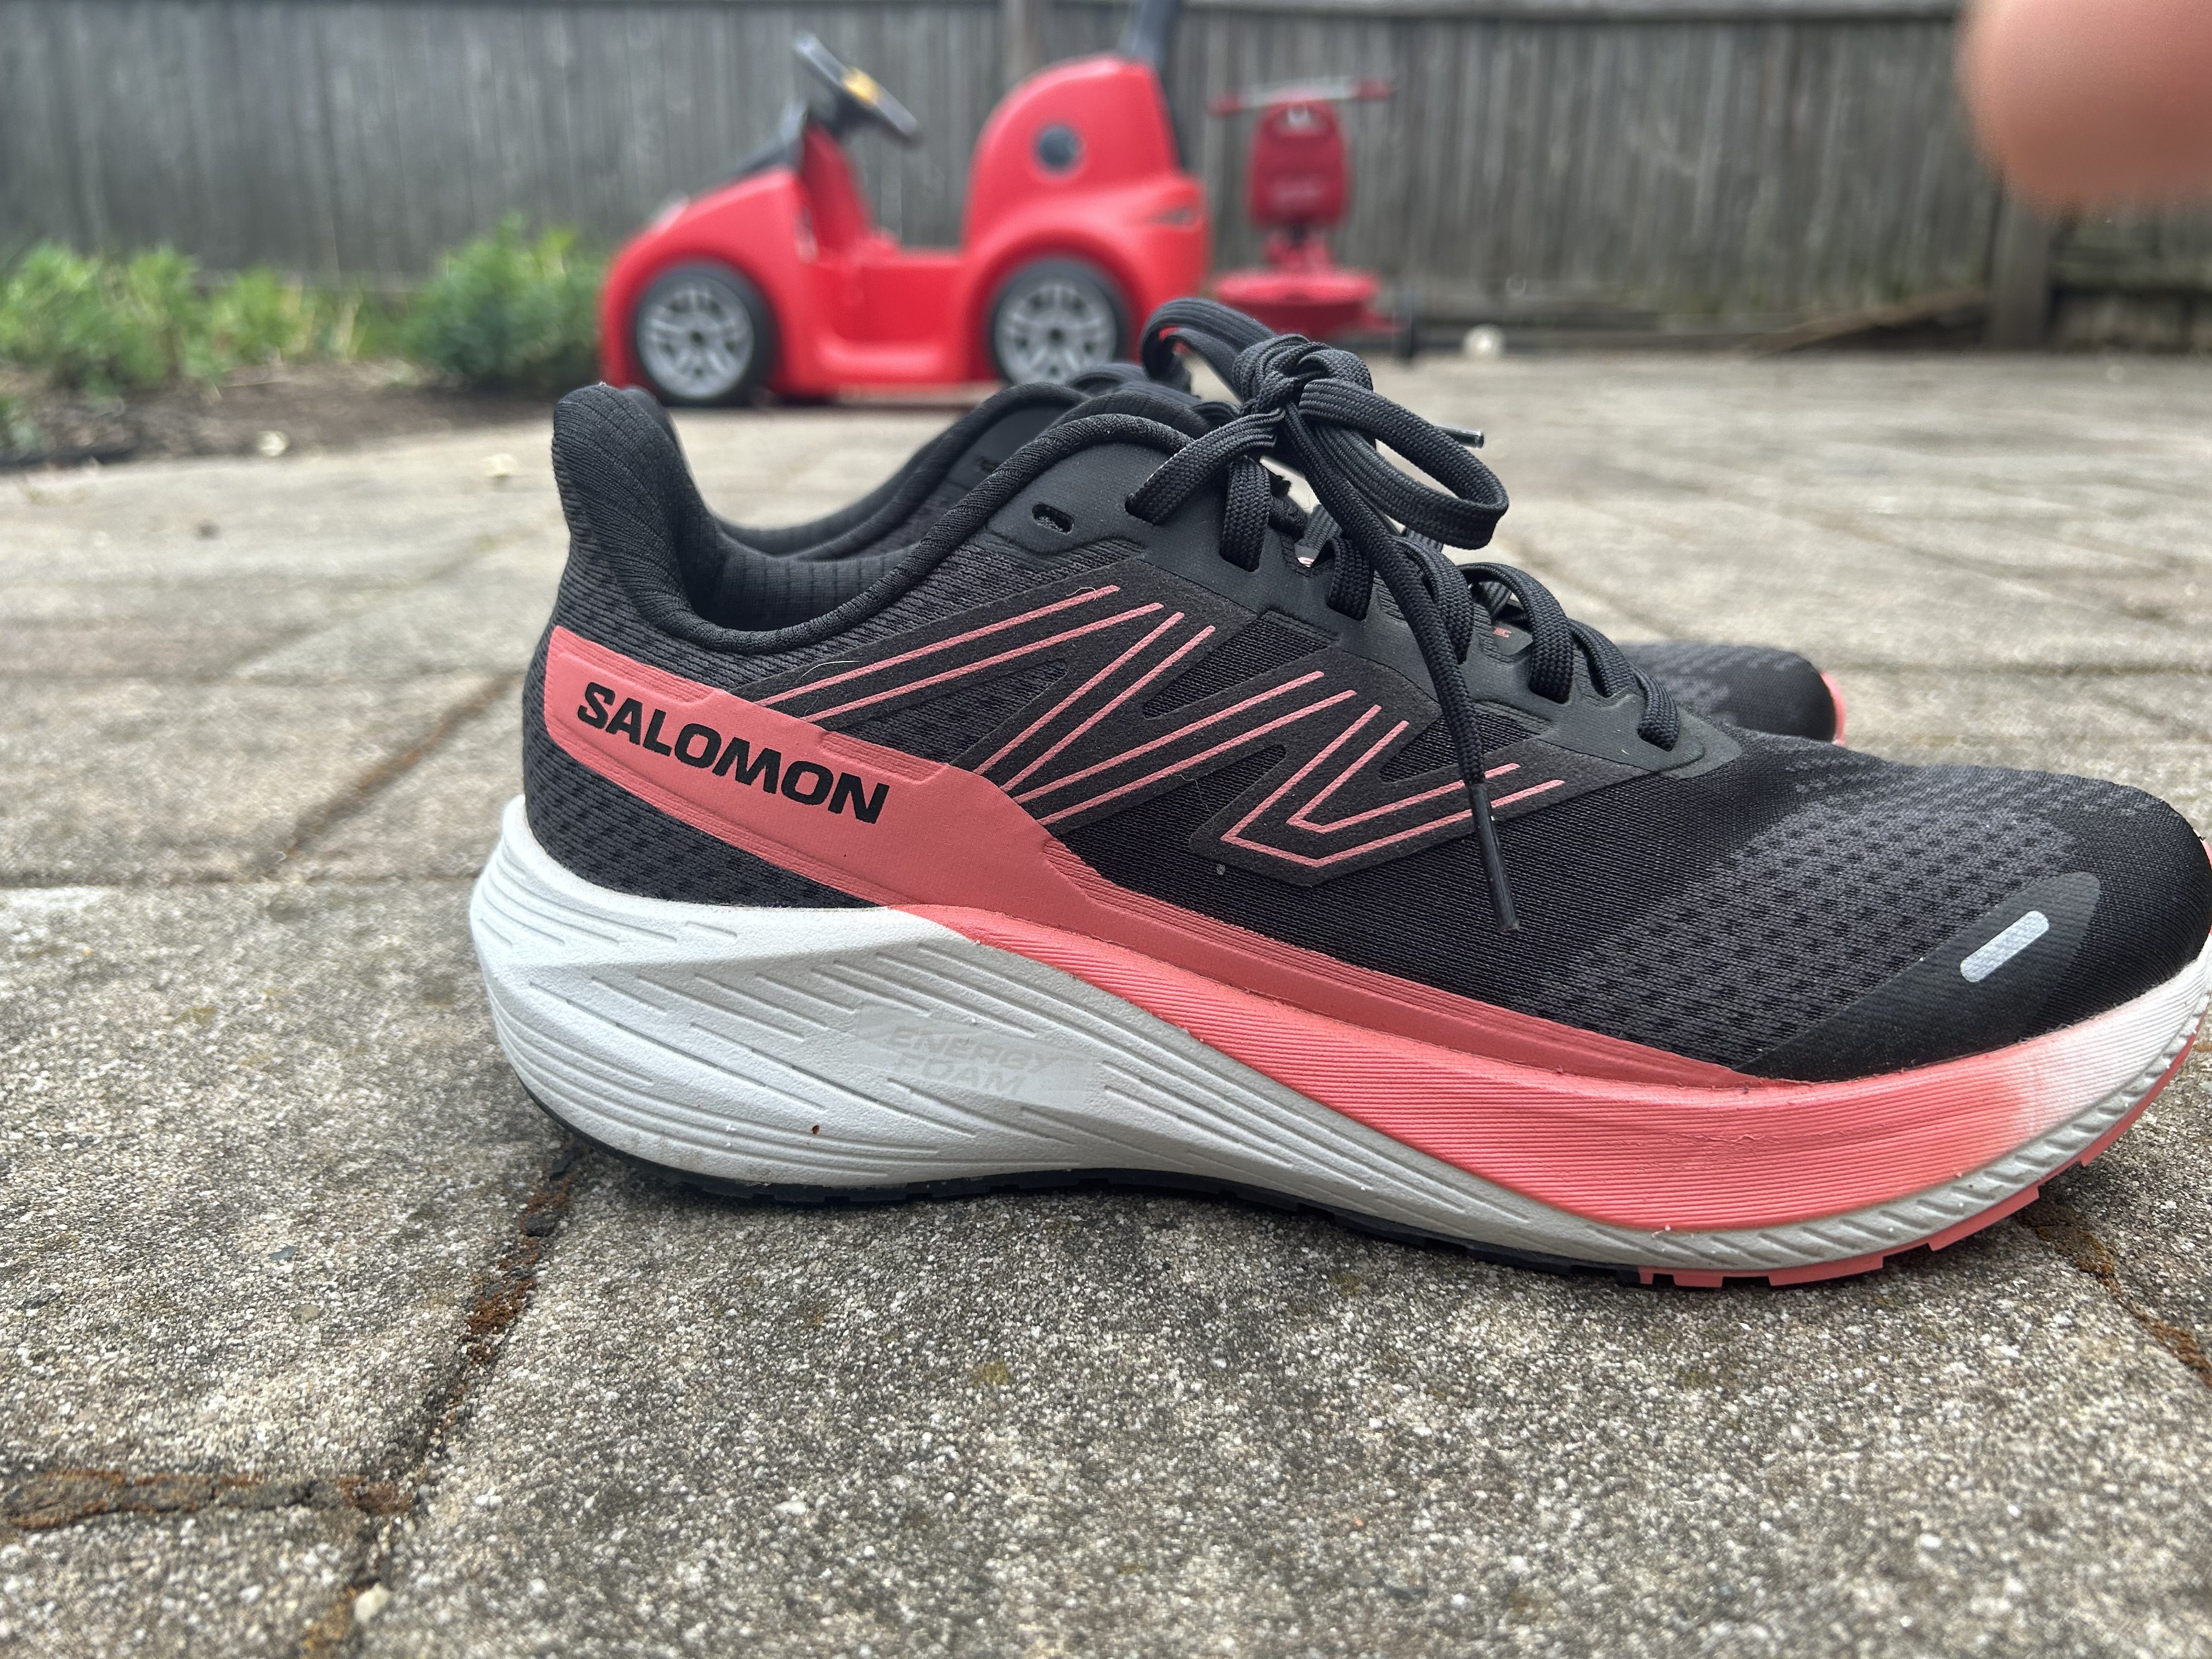 Why Is Everyone So Obsessed with the Salomon XT-6 Sneaker? | Gear Patrol